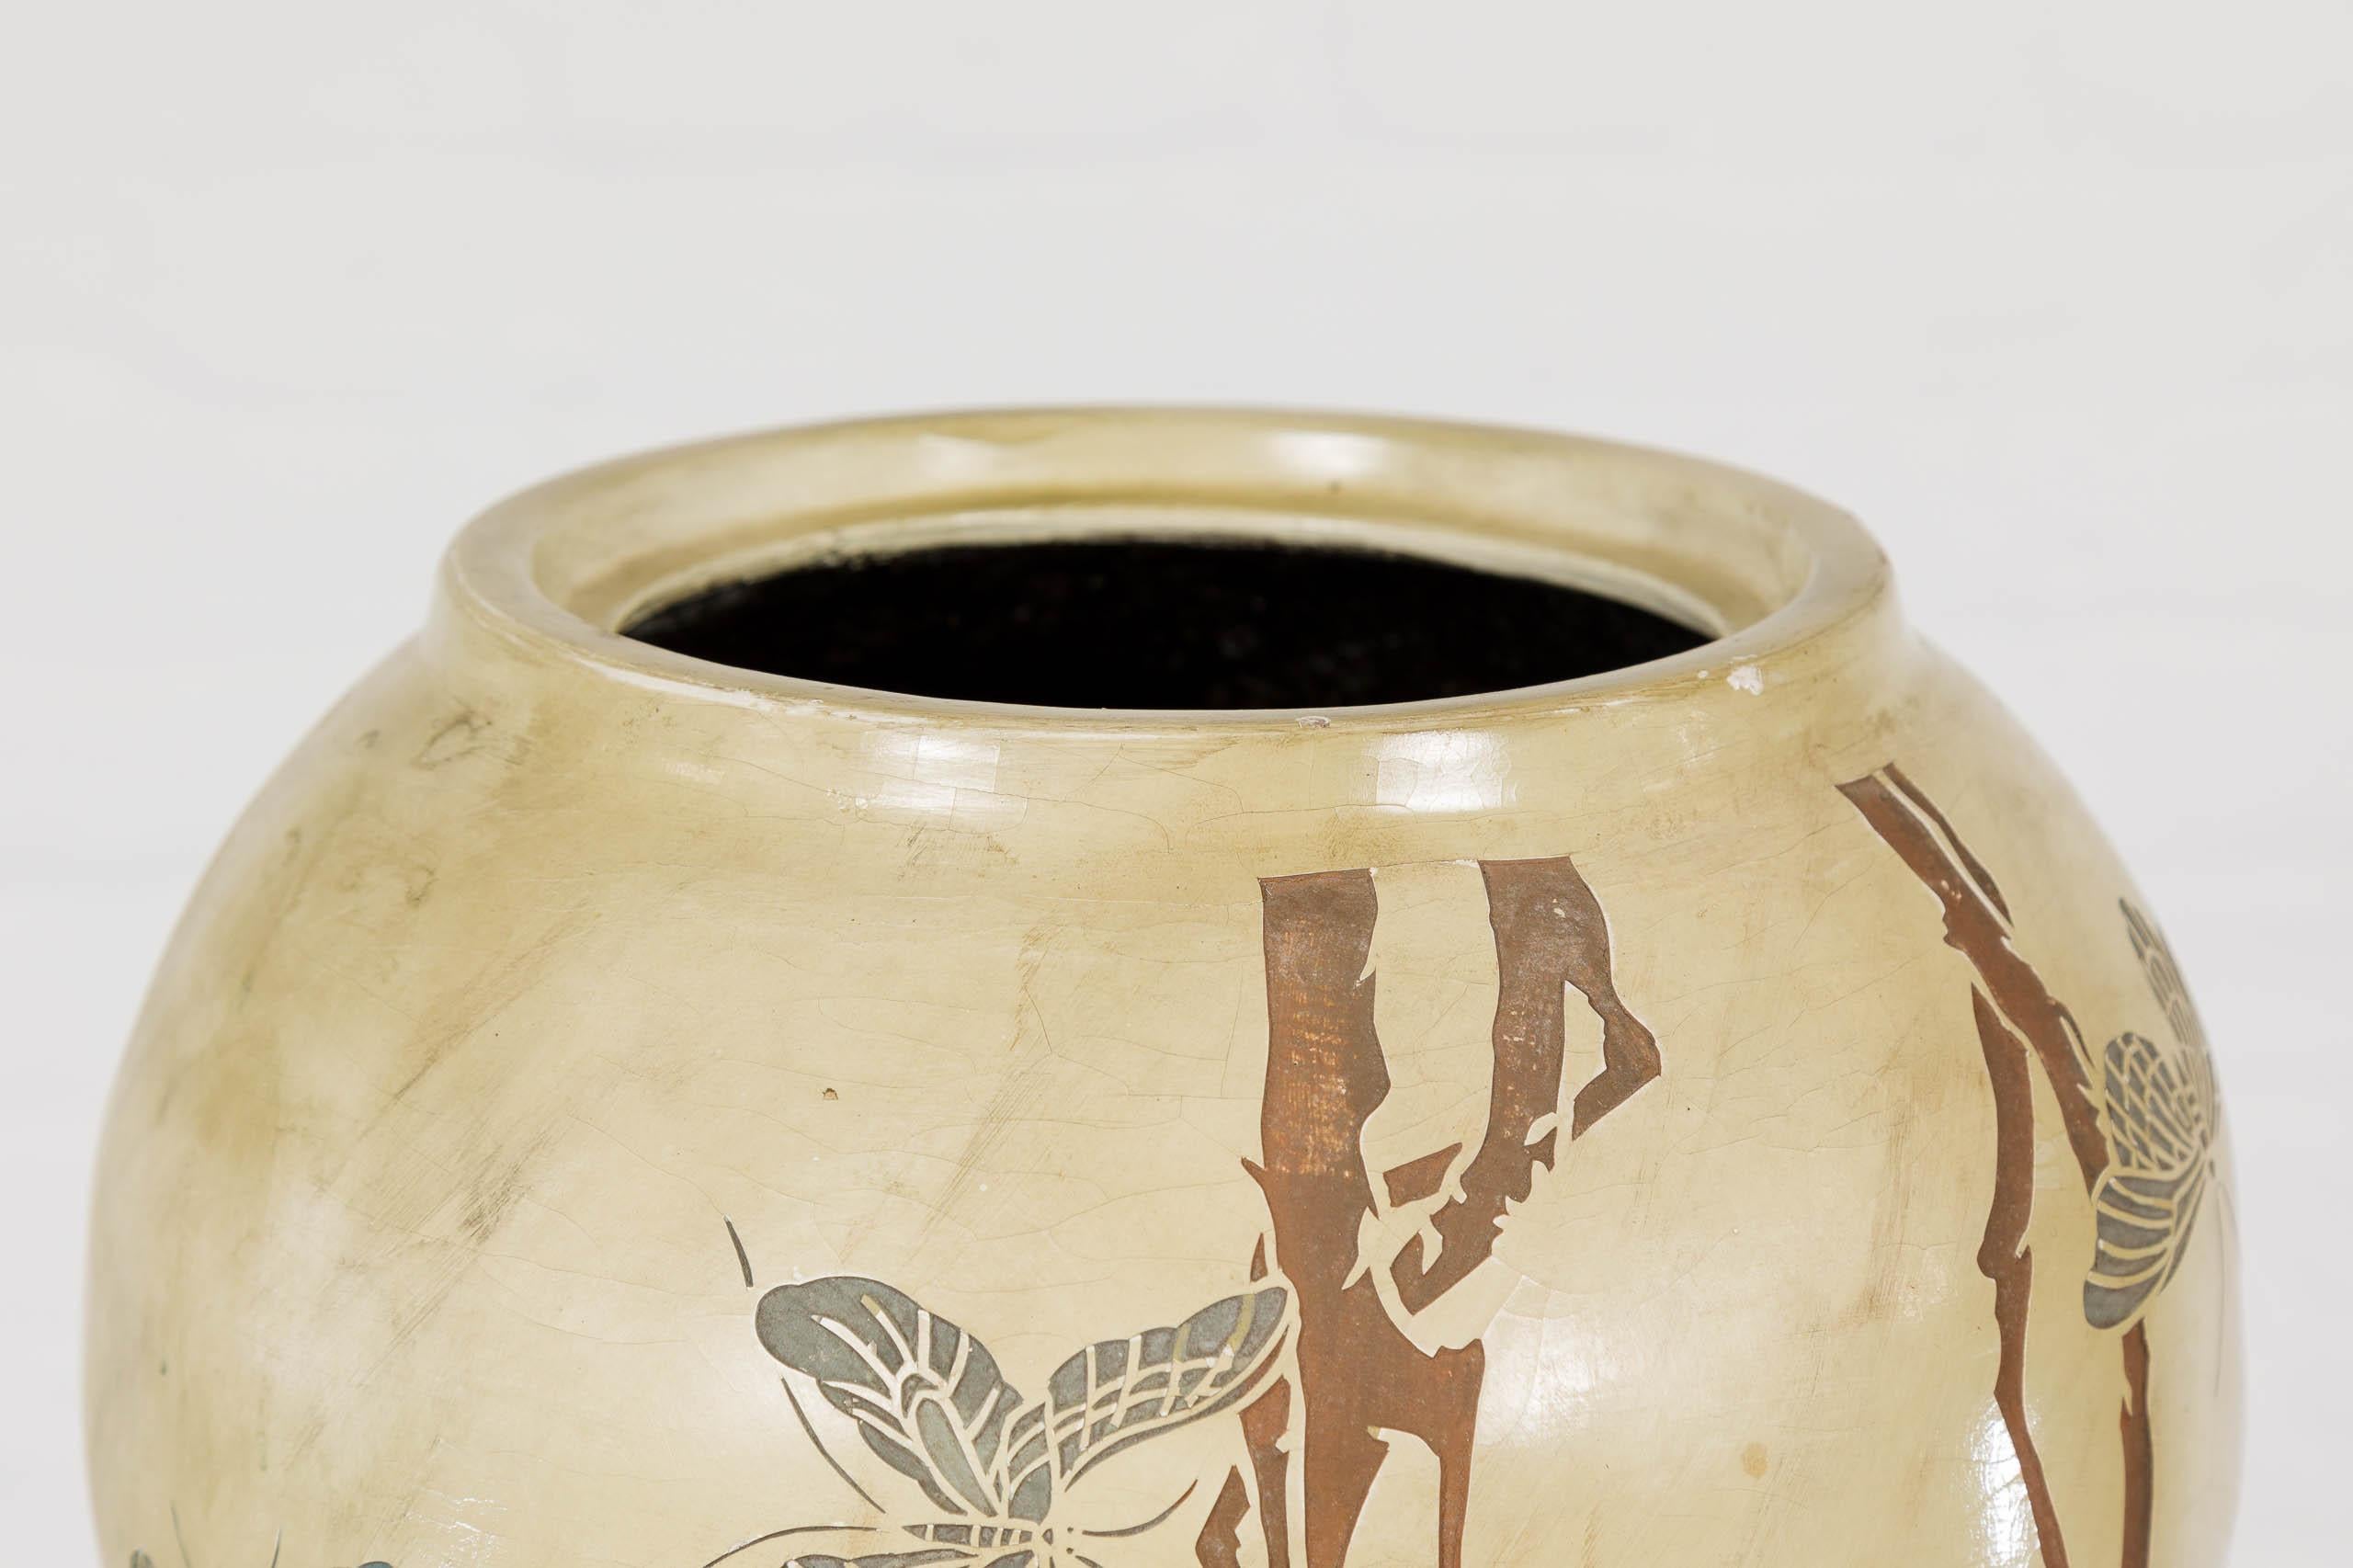 Japanese Antique Mustard Glaze Ceramic Planter with Incised Butterfly Decor In Good Condition For Sale In Yonkers, NY